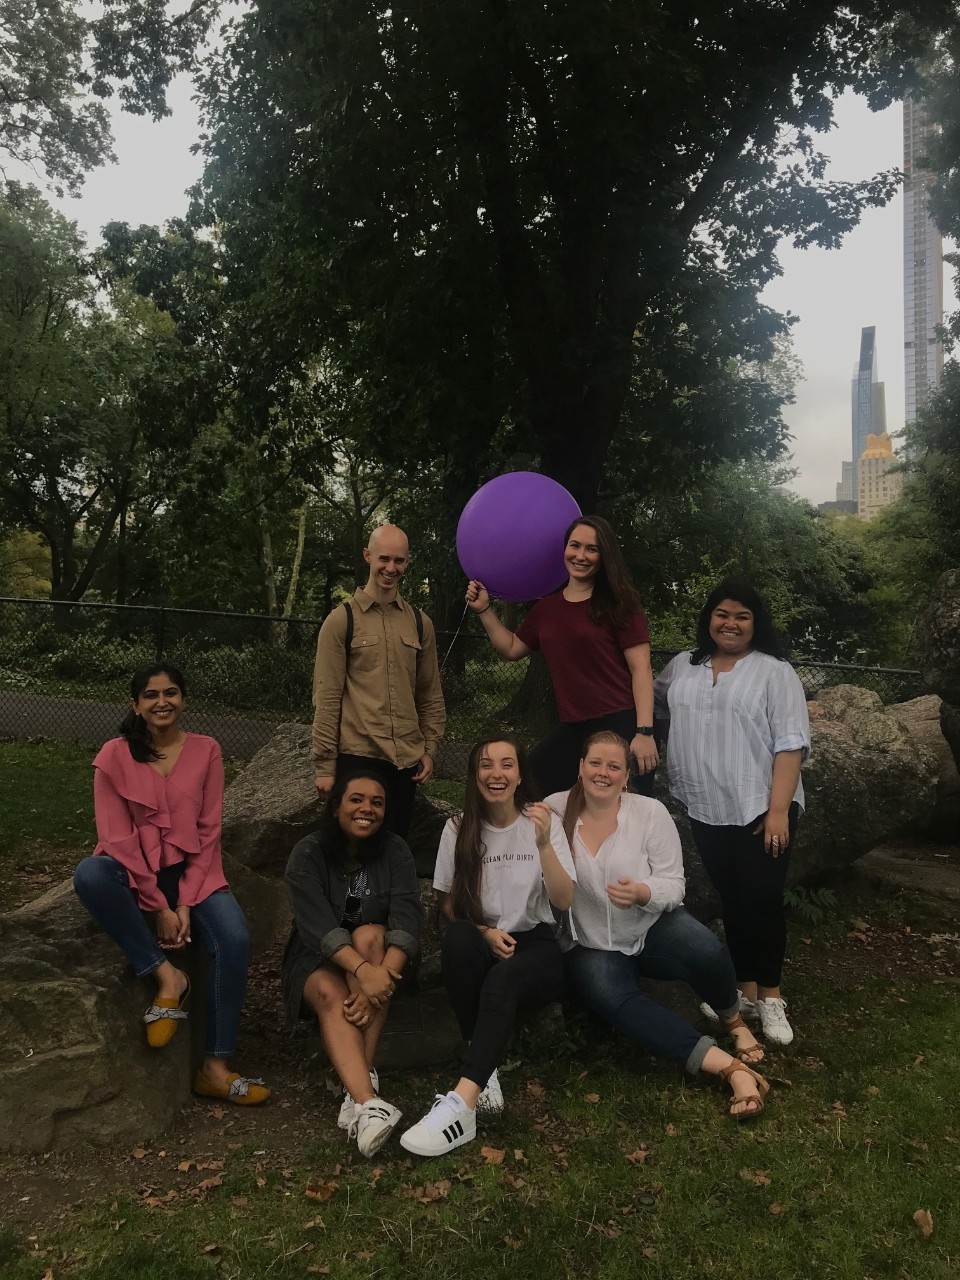 Publishing Students Association (PSA) members pose with a purple balloon on a large rock in NYC's Central Park